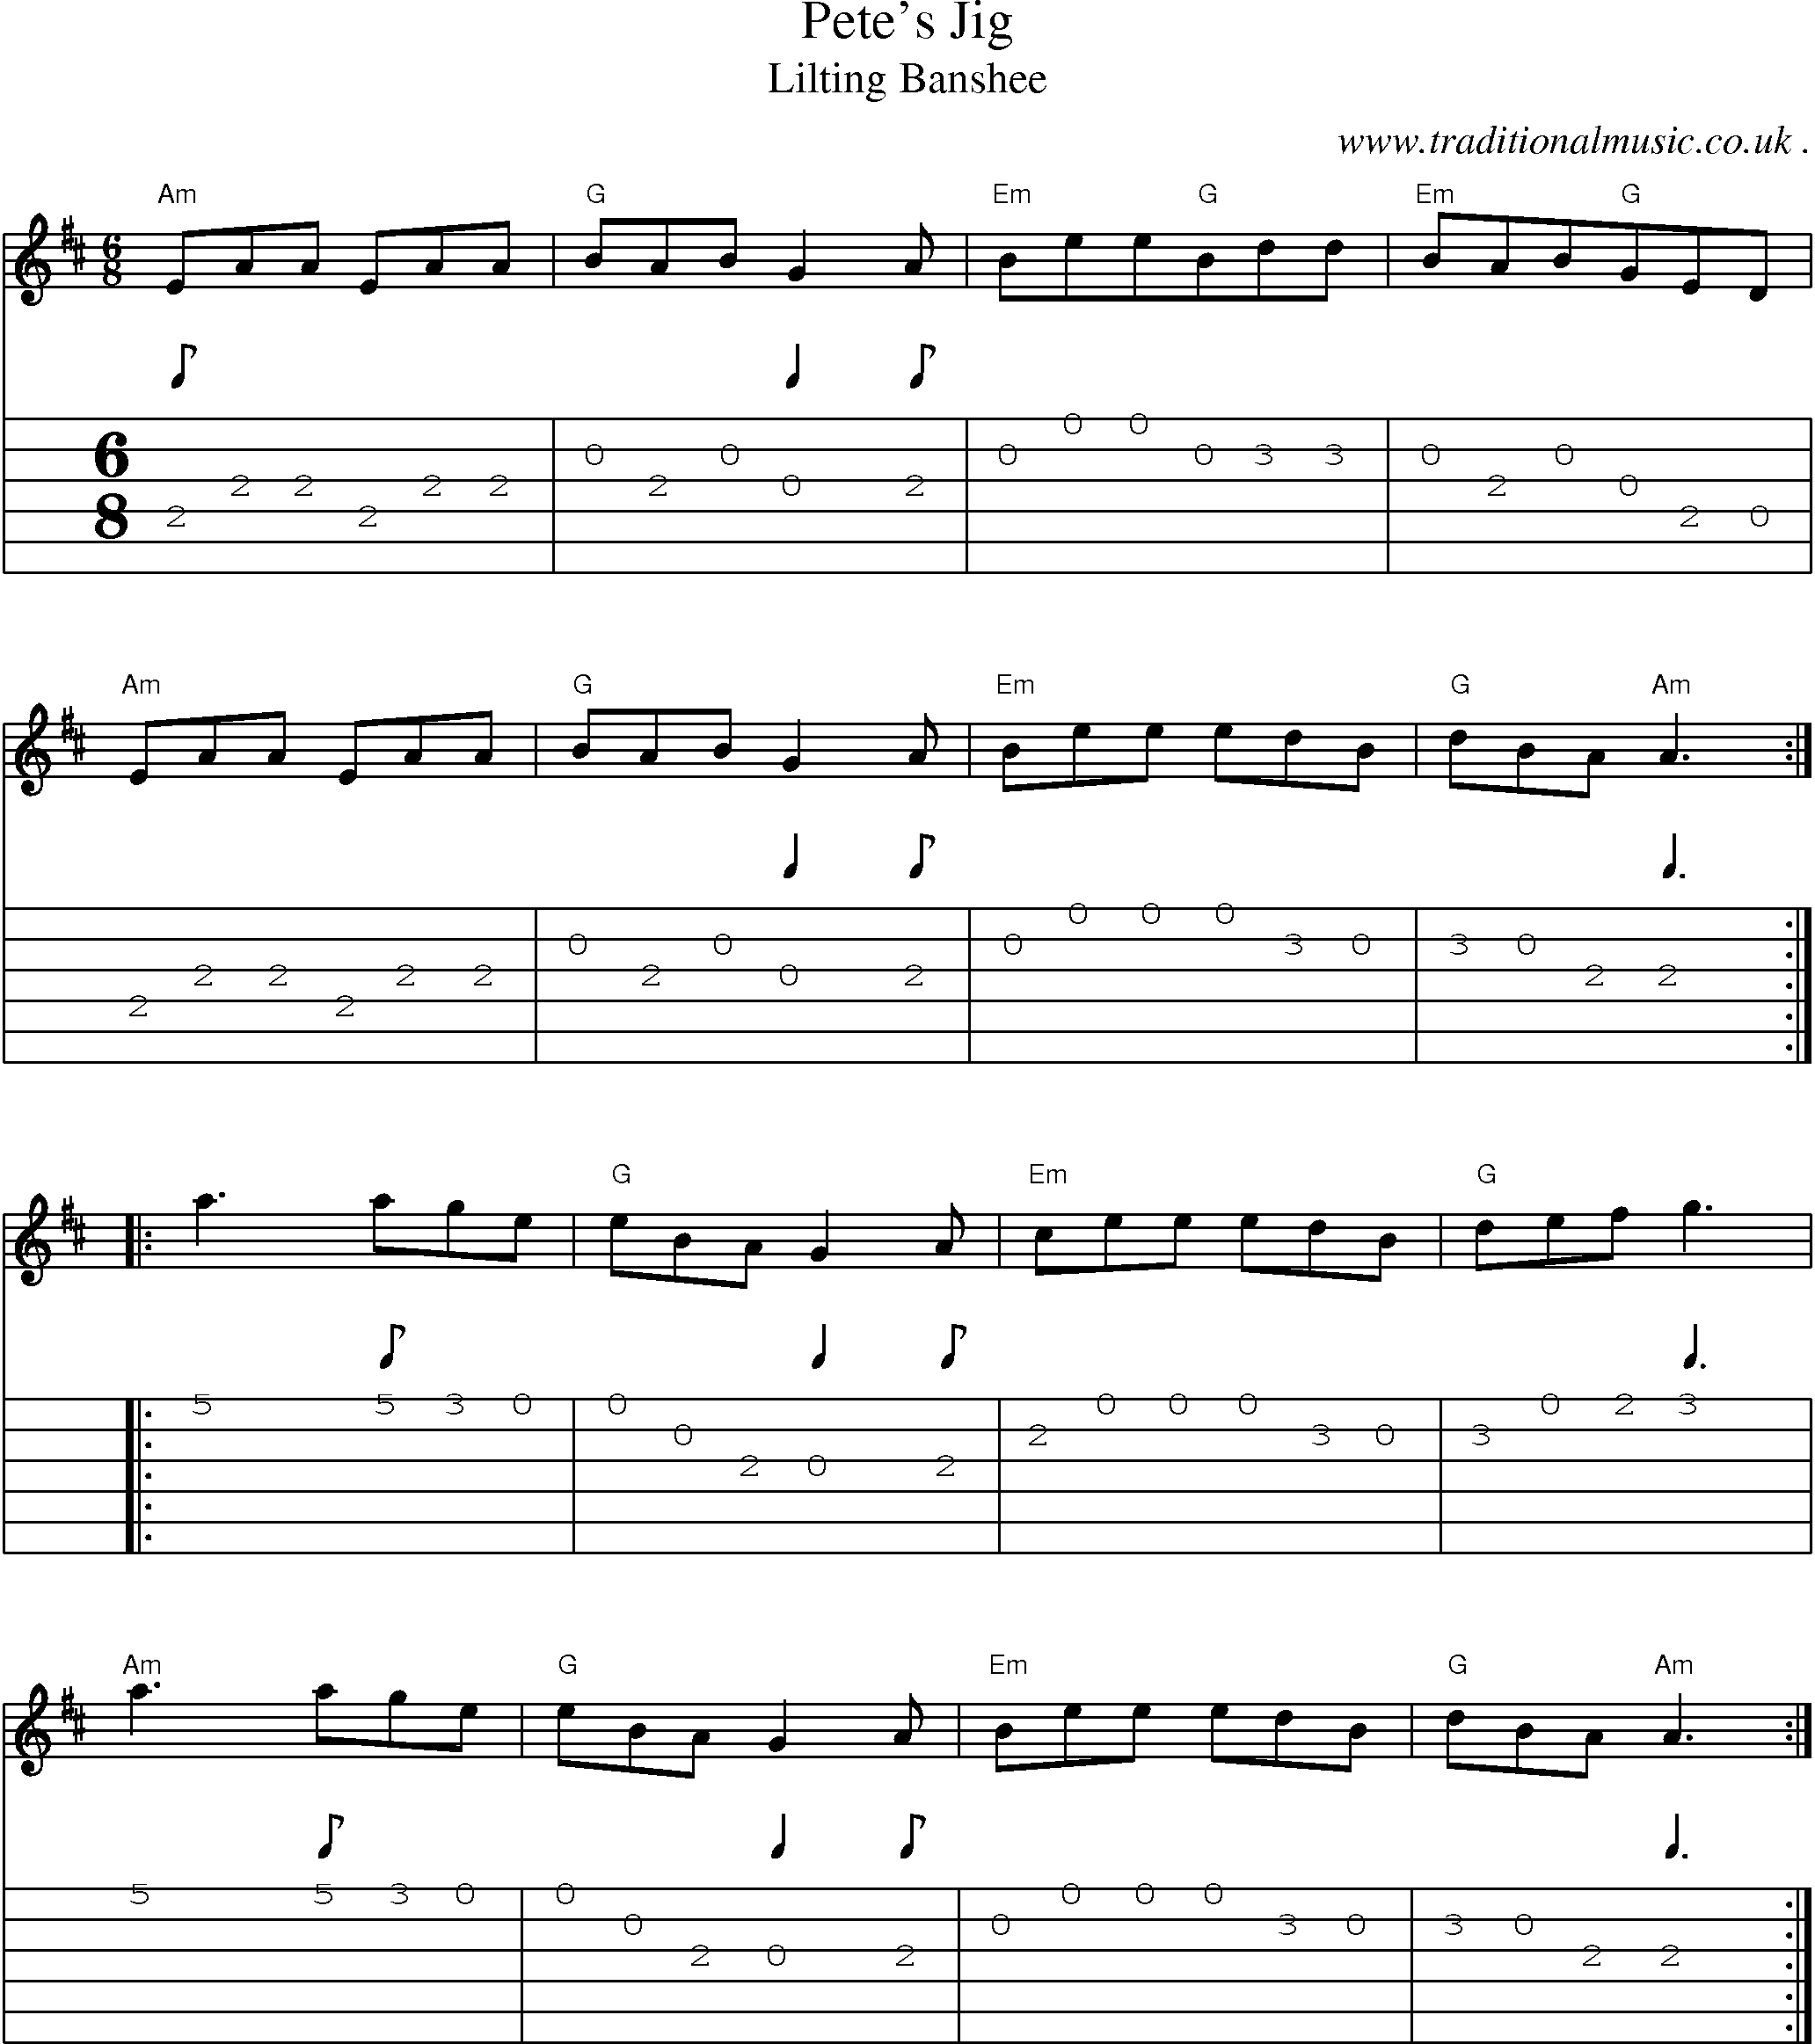 Sheet-Music and Guitar Tabs for Petes Jig